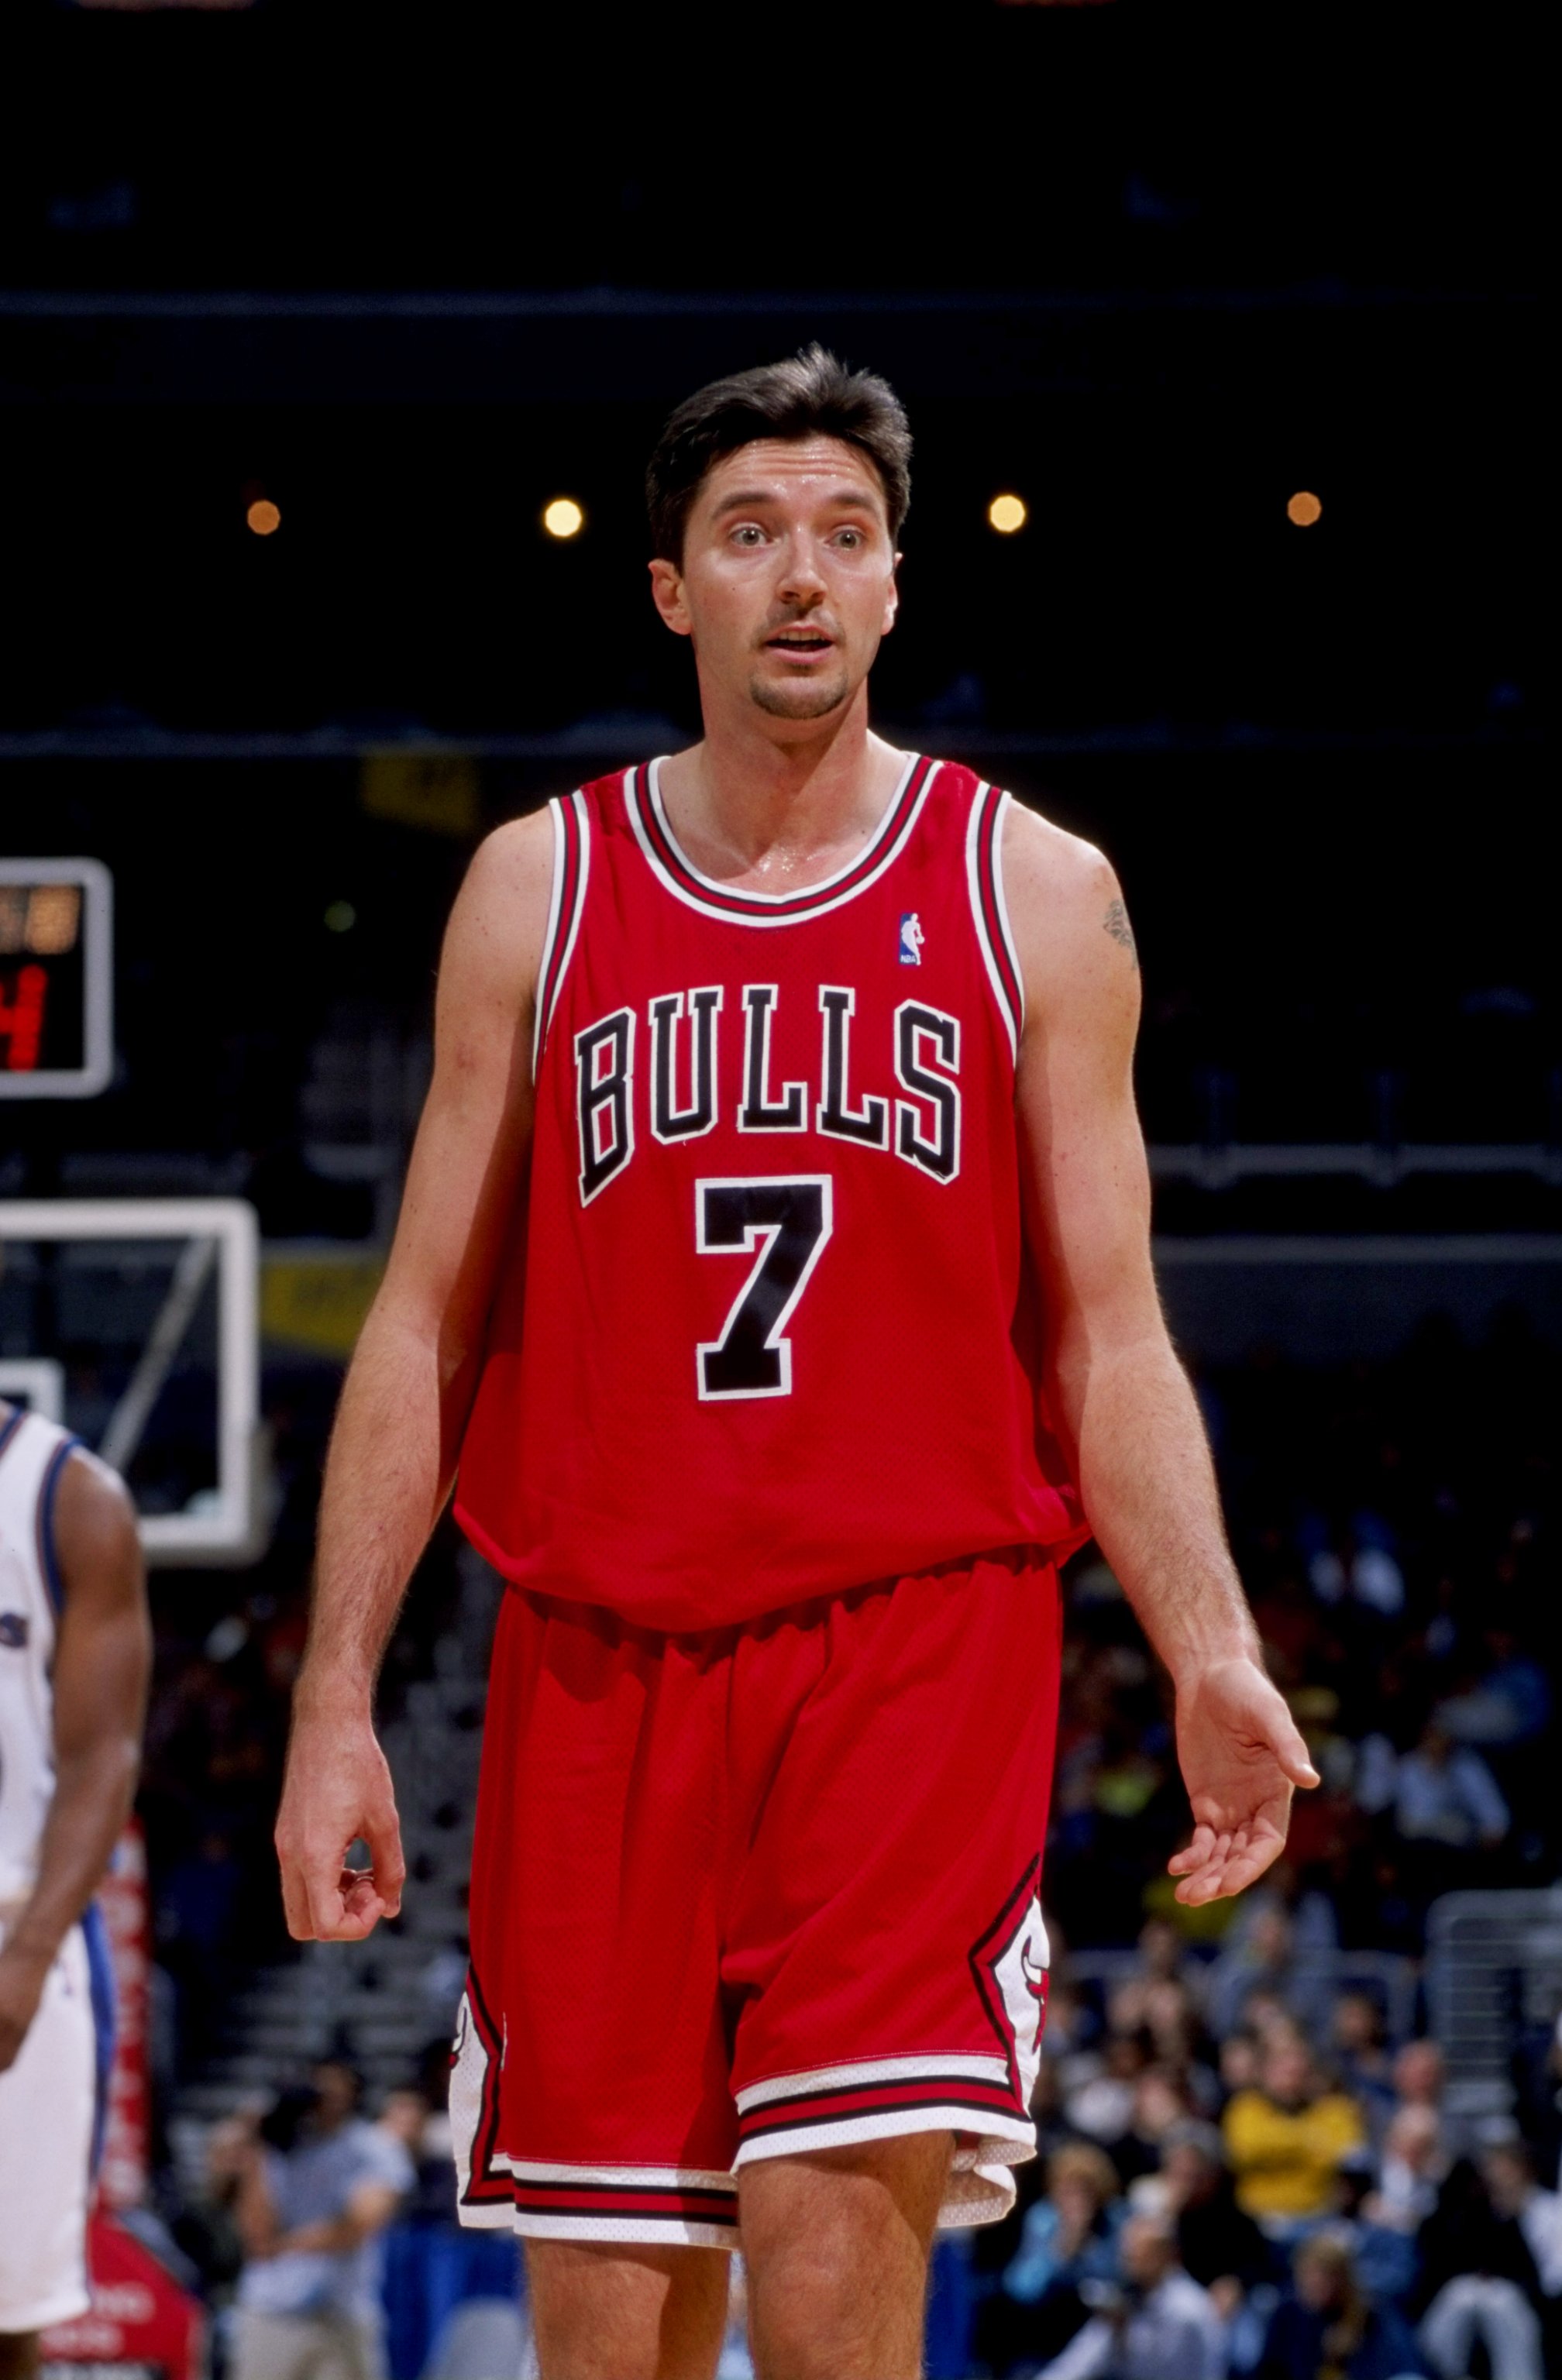 Toni Kukoc of the Chicago Bulls and P.J. Brown of the New Jersey Nets  News Photo - Getty Images